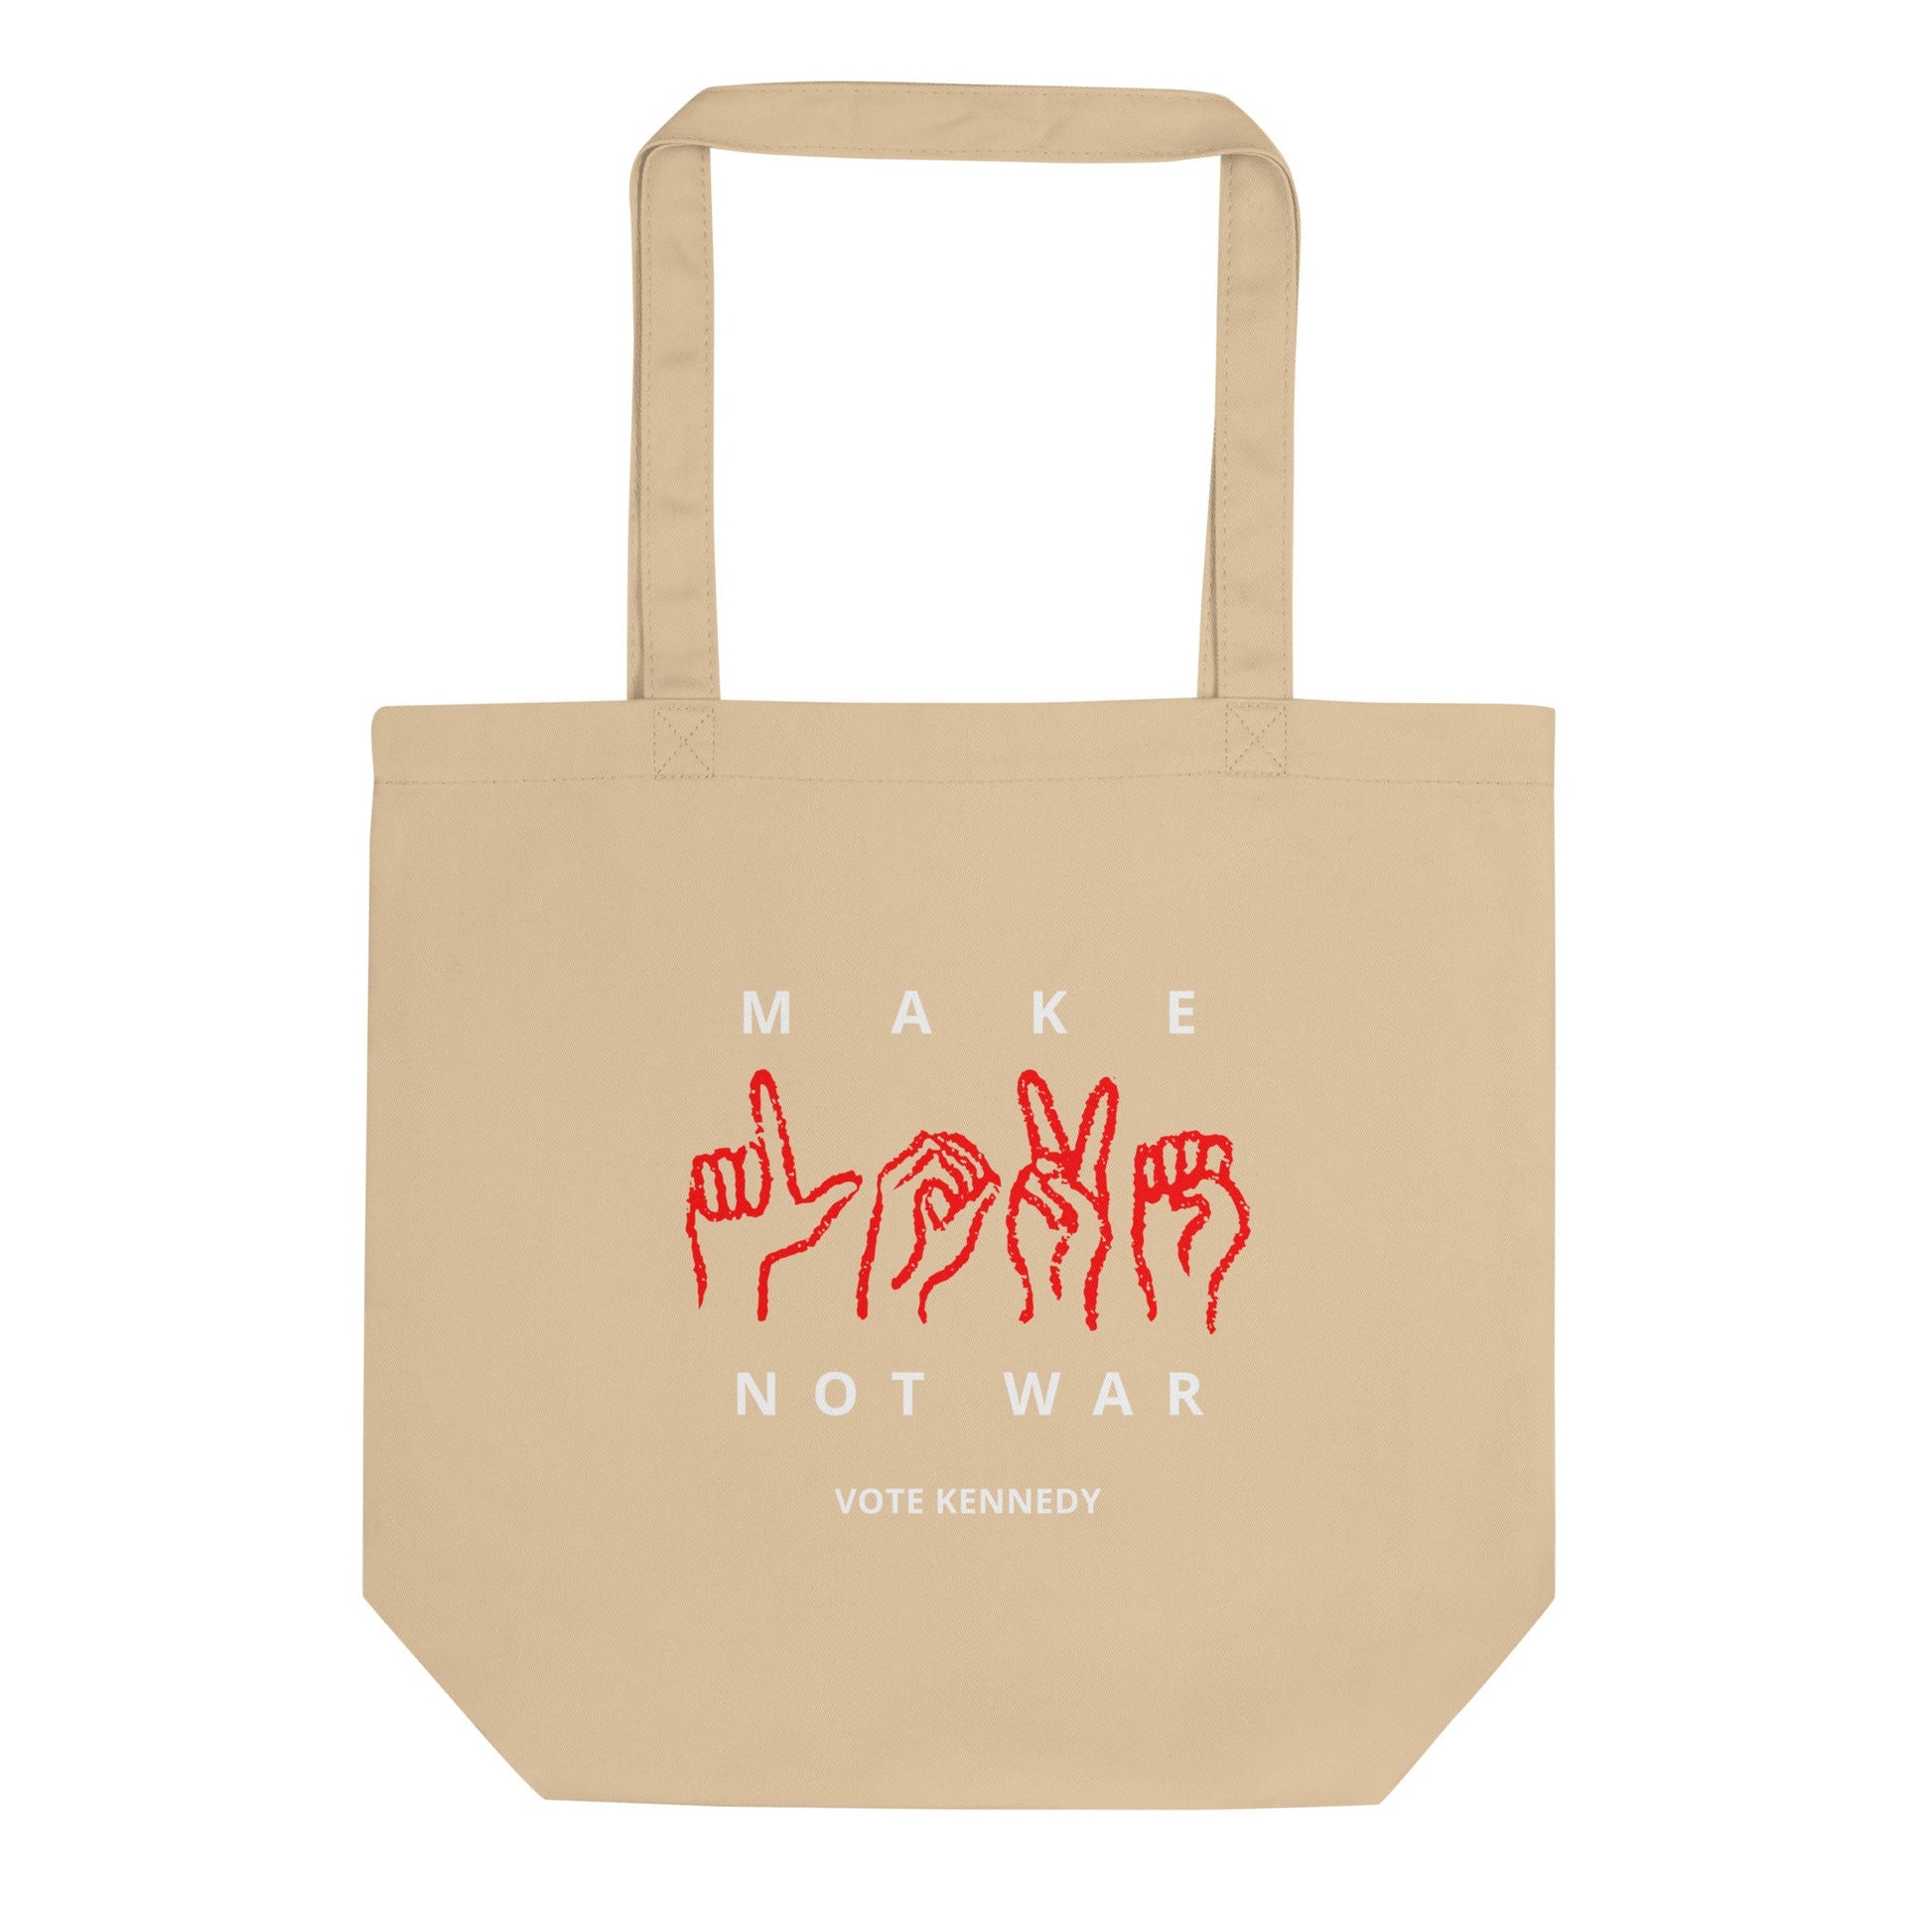 Make Love Not War Organic Tote Bag - TEAM KENNEDY. All rights reserved